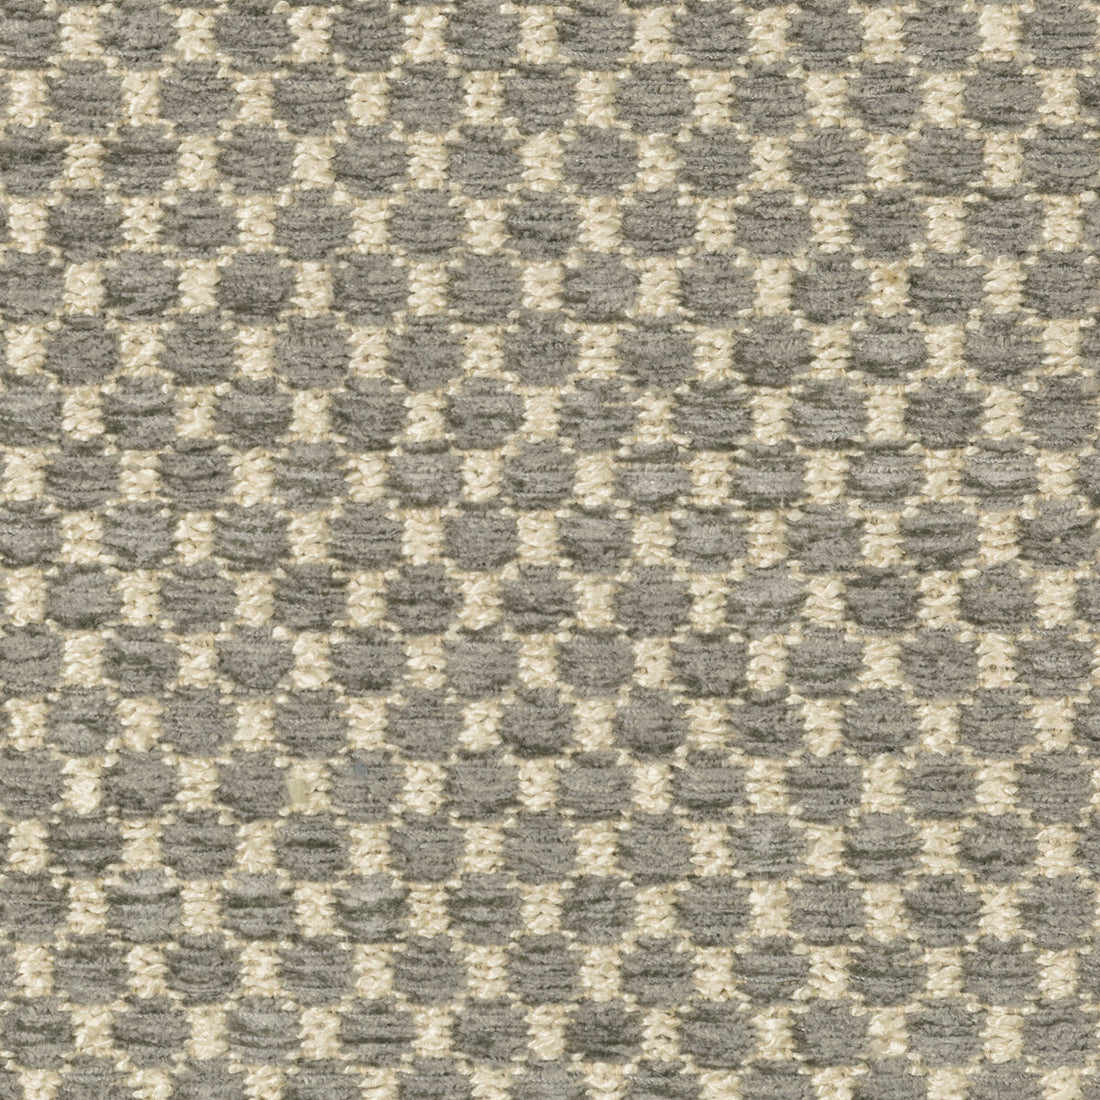 Ecrins Texture fabric in grey color - pattern 8019147.11.0 - by Brunschwig &amp; Fils in the Chambery Textures II collection